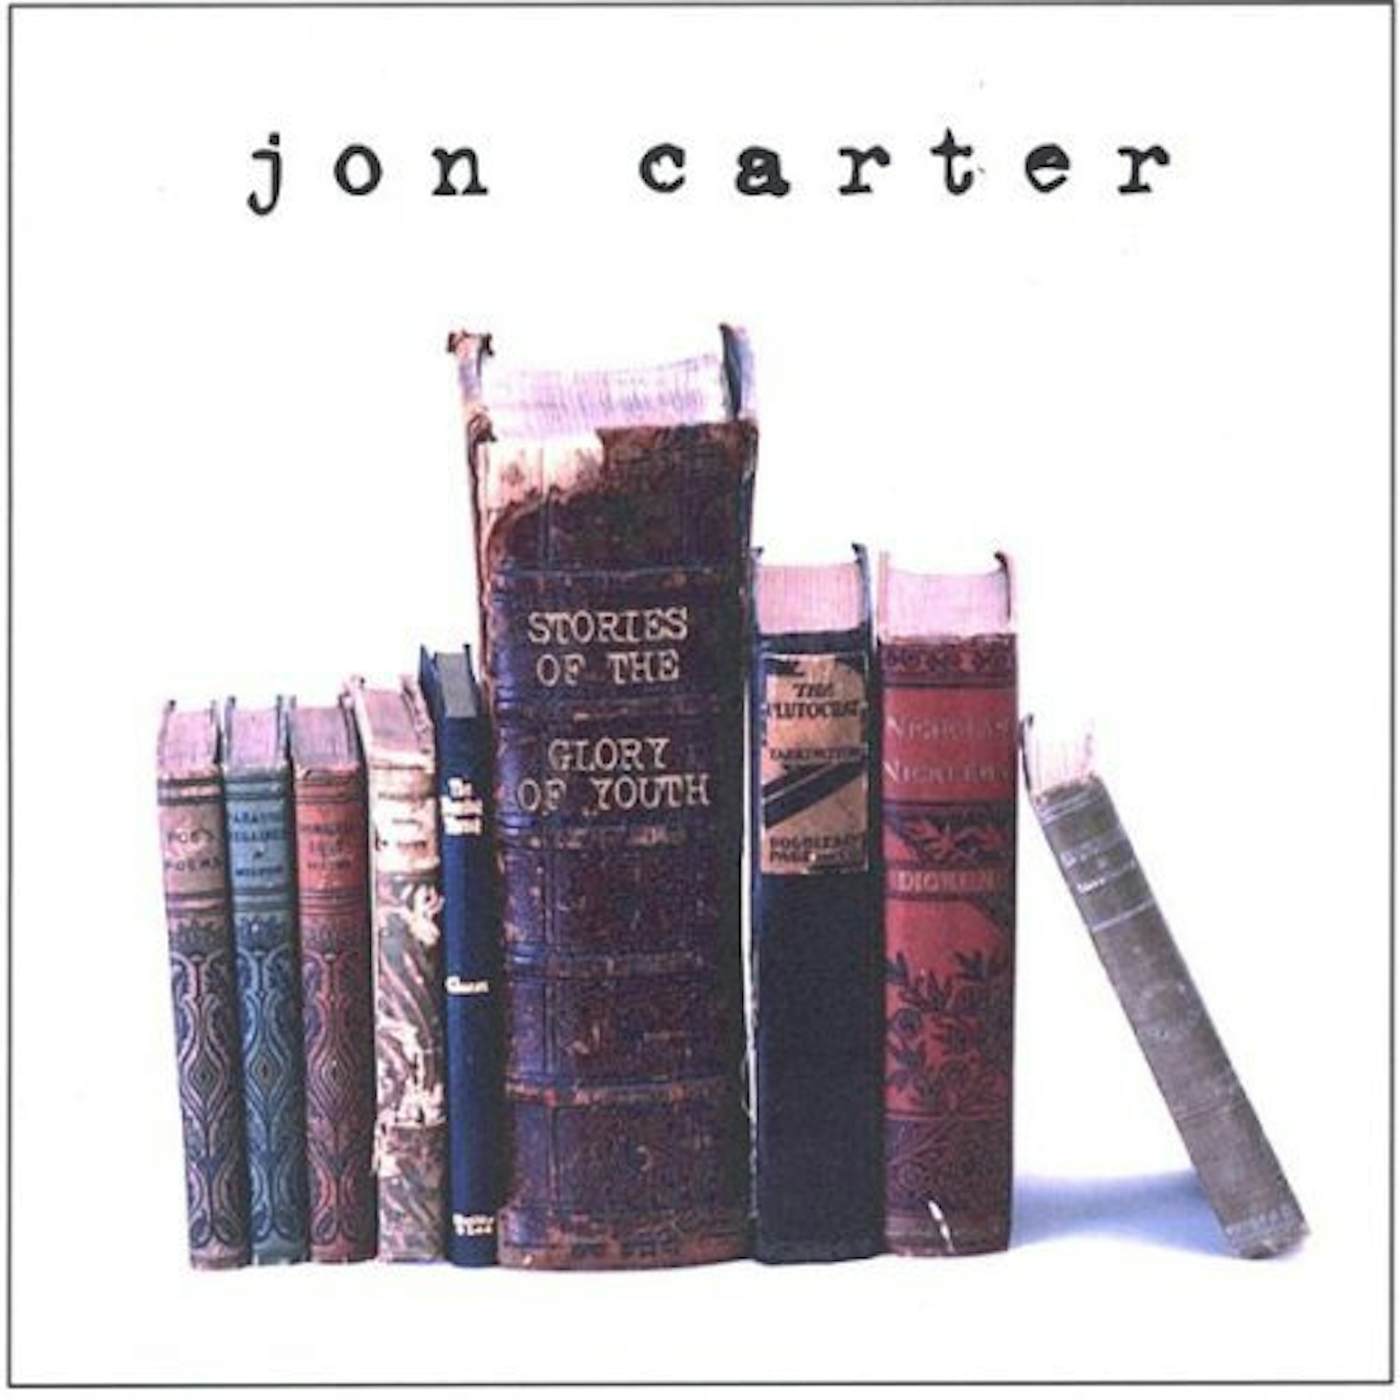 Jon Carter STORIES OF THE GLORY OF YOUTH CD